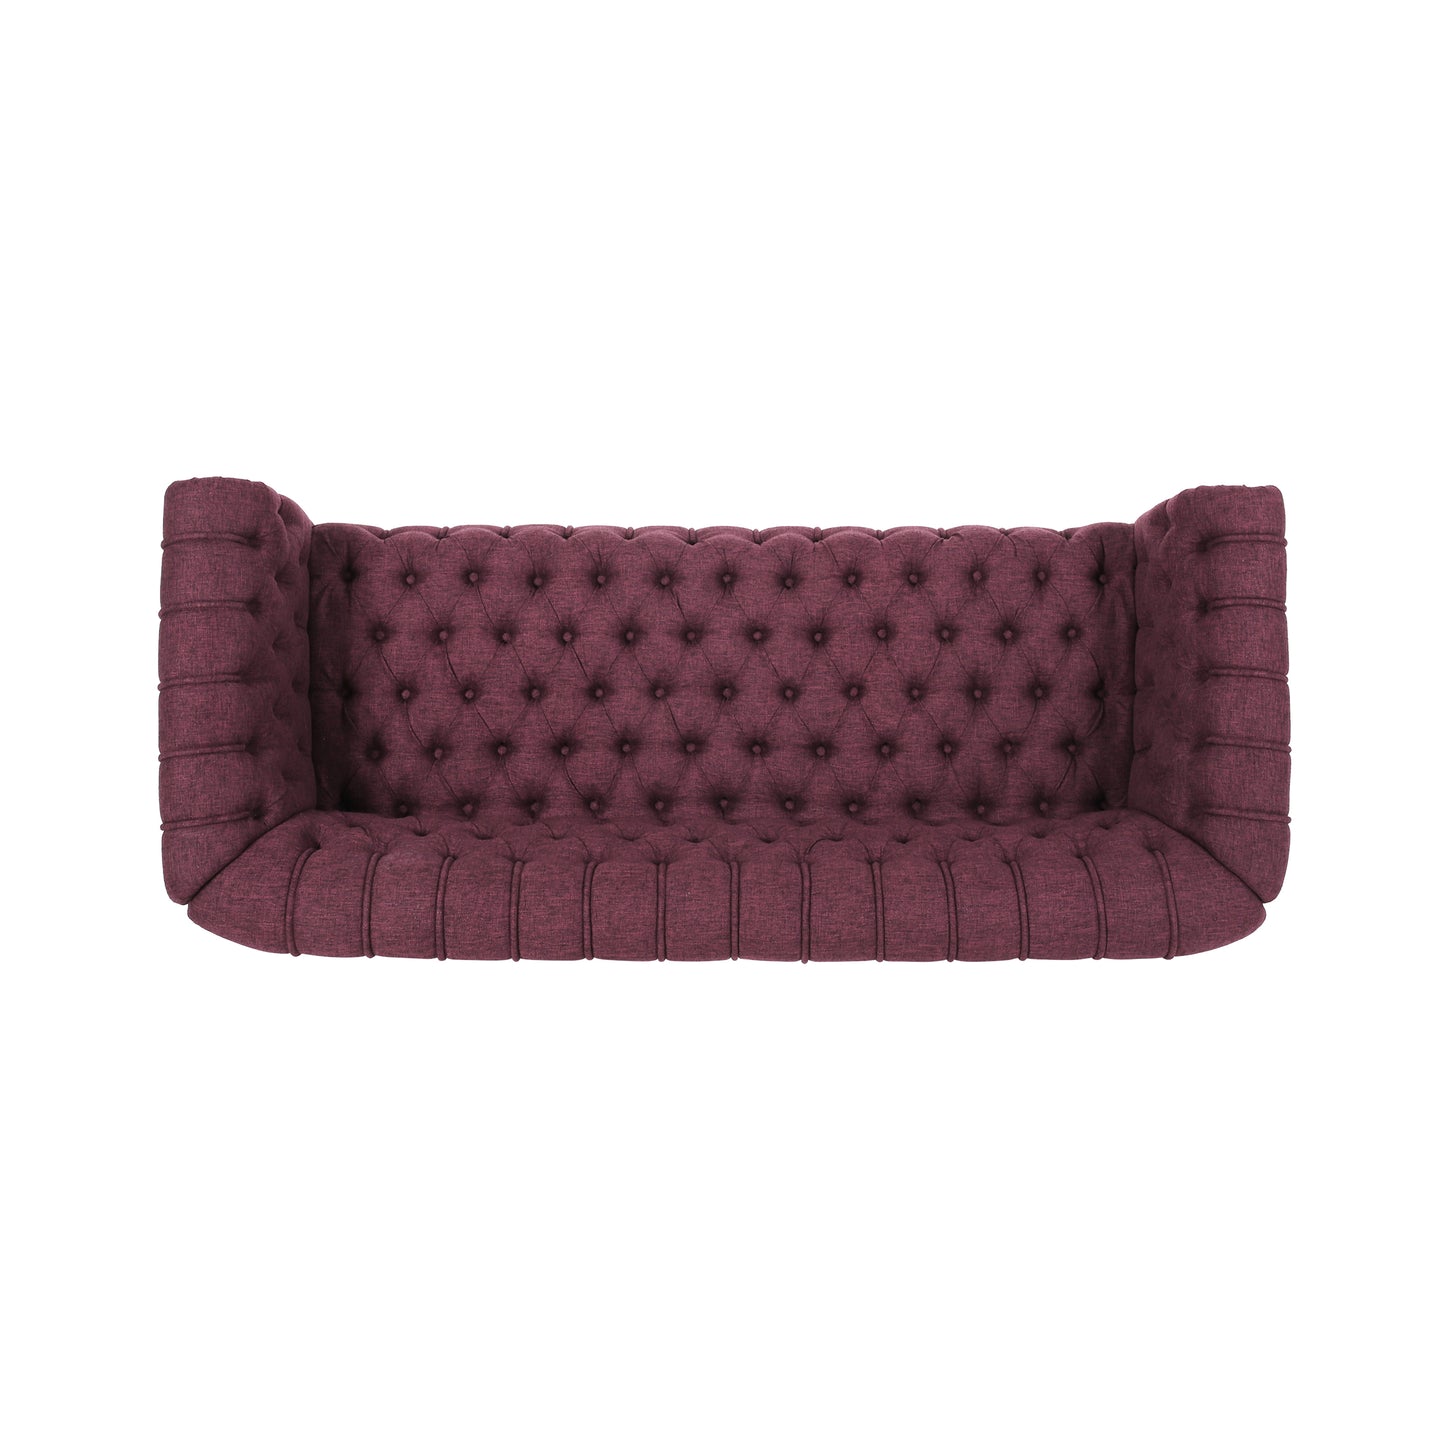 Edgar Button Tufted Rolled Back Upholstered Sofa